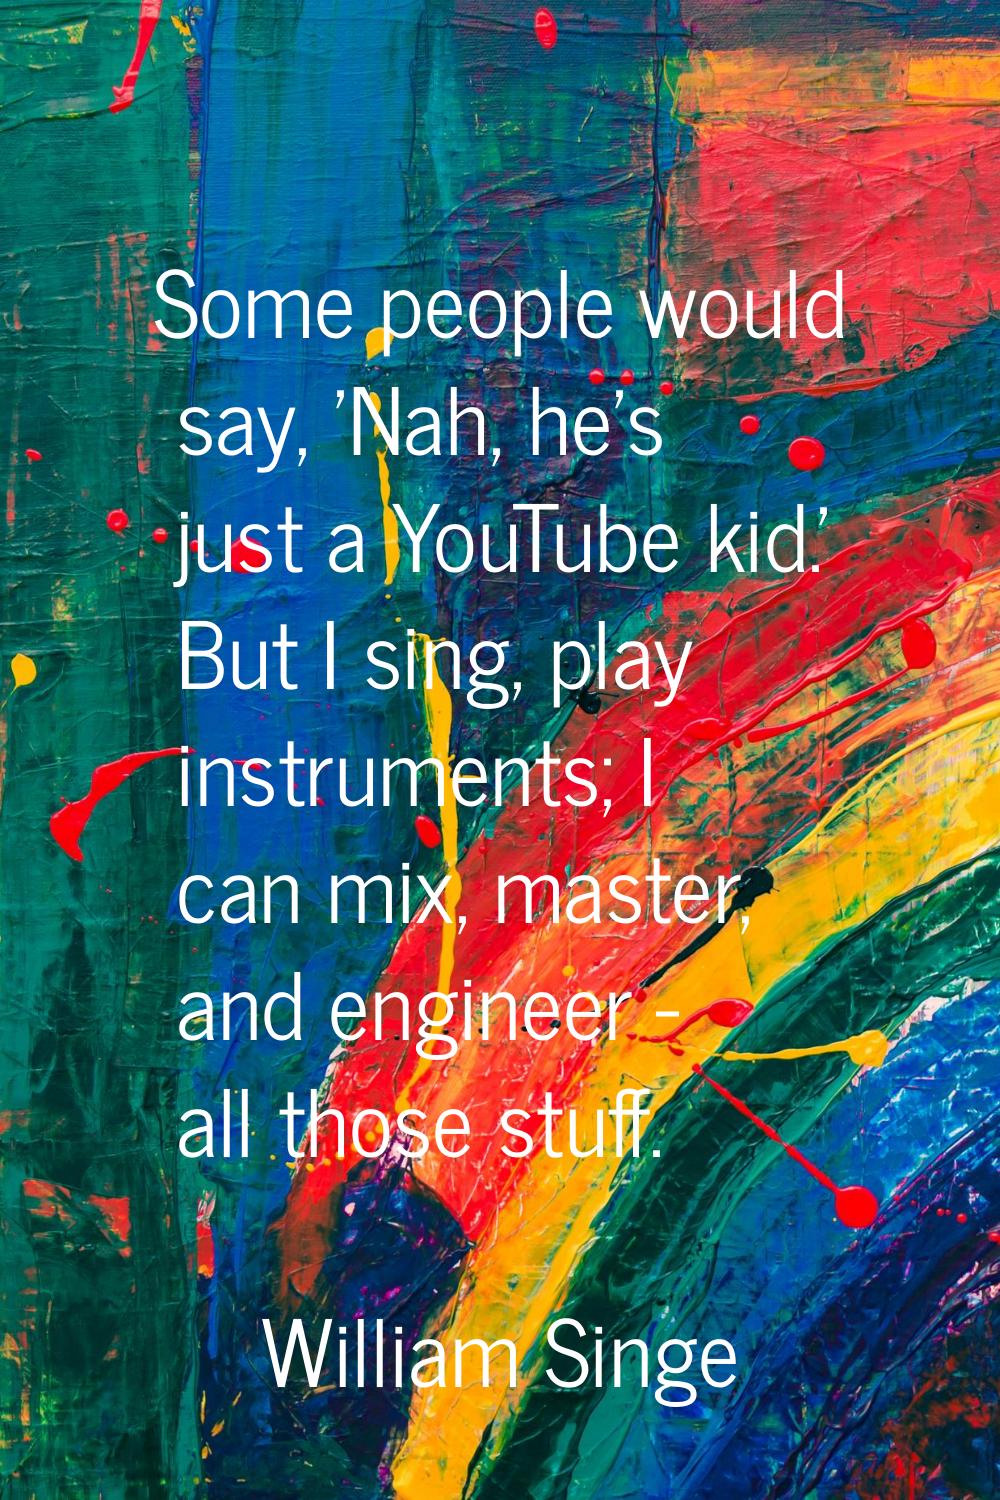 Some people would say, 'Nah, he's just a YouTube kid.' But I sing, play instruments; I can mix, mas